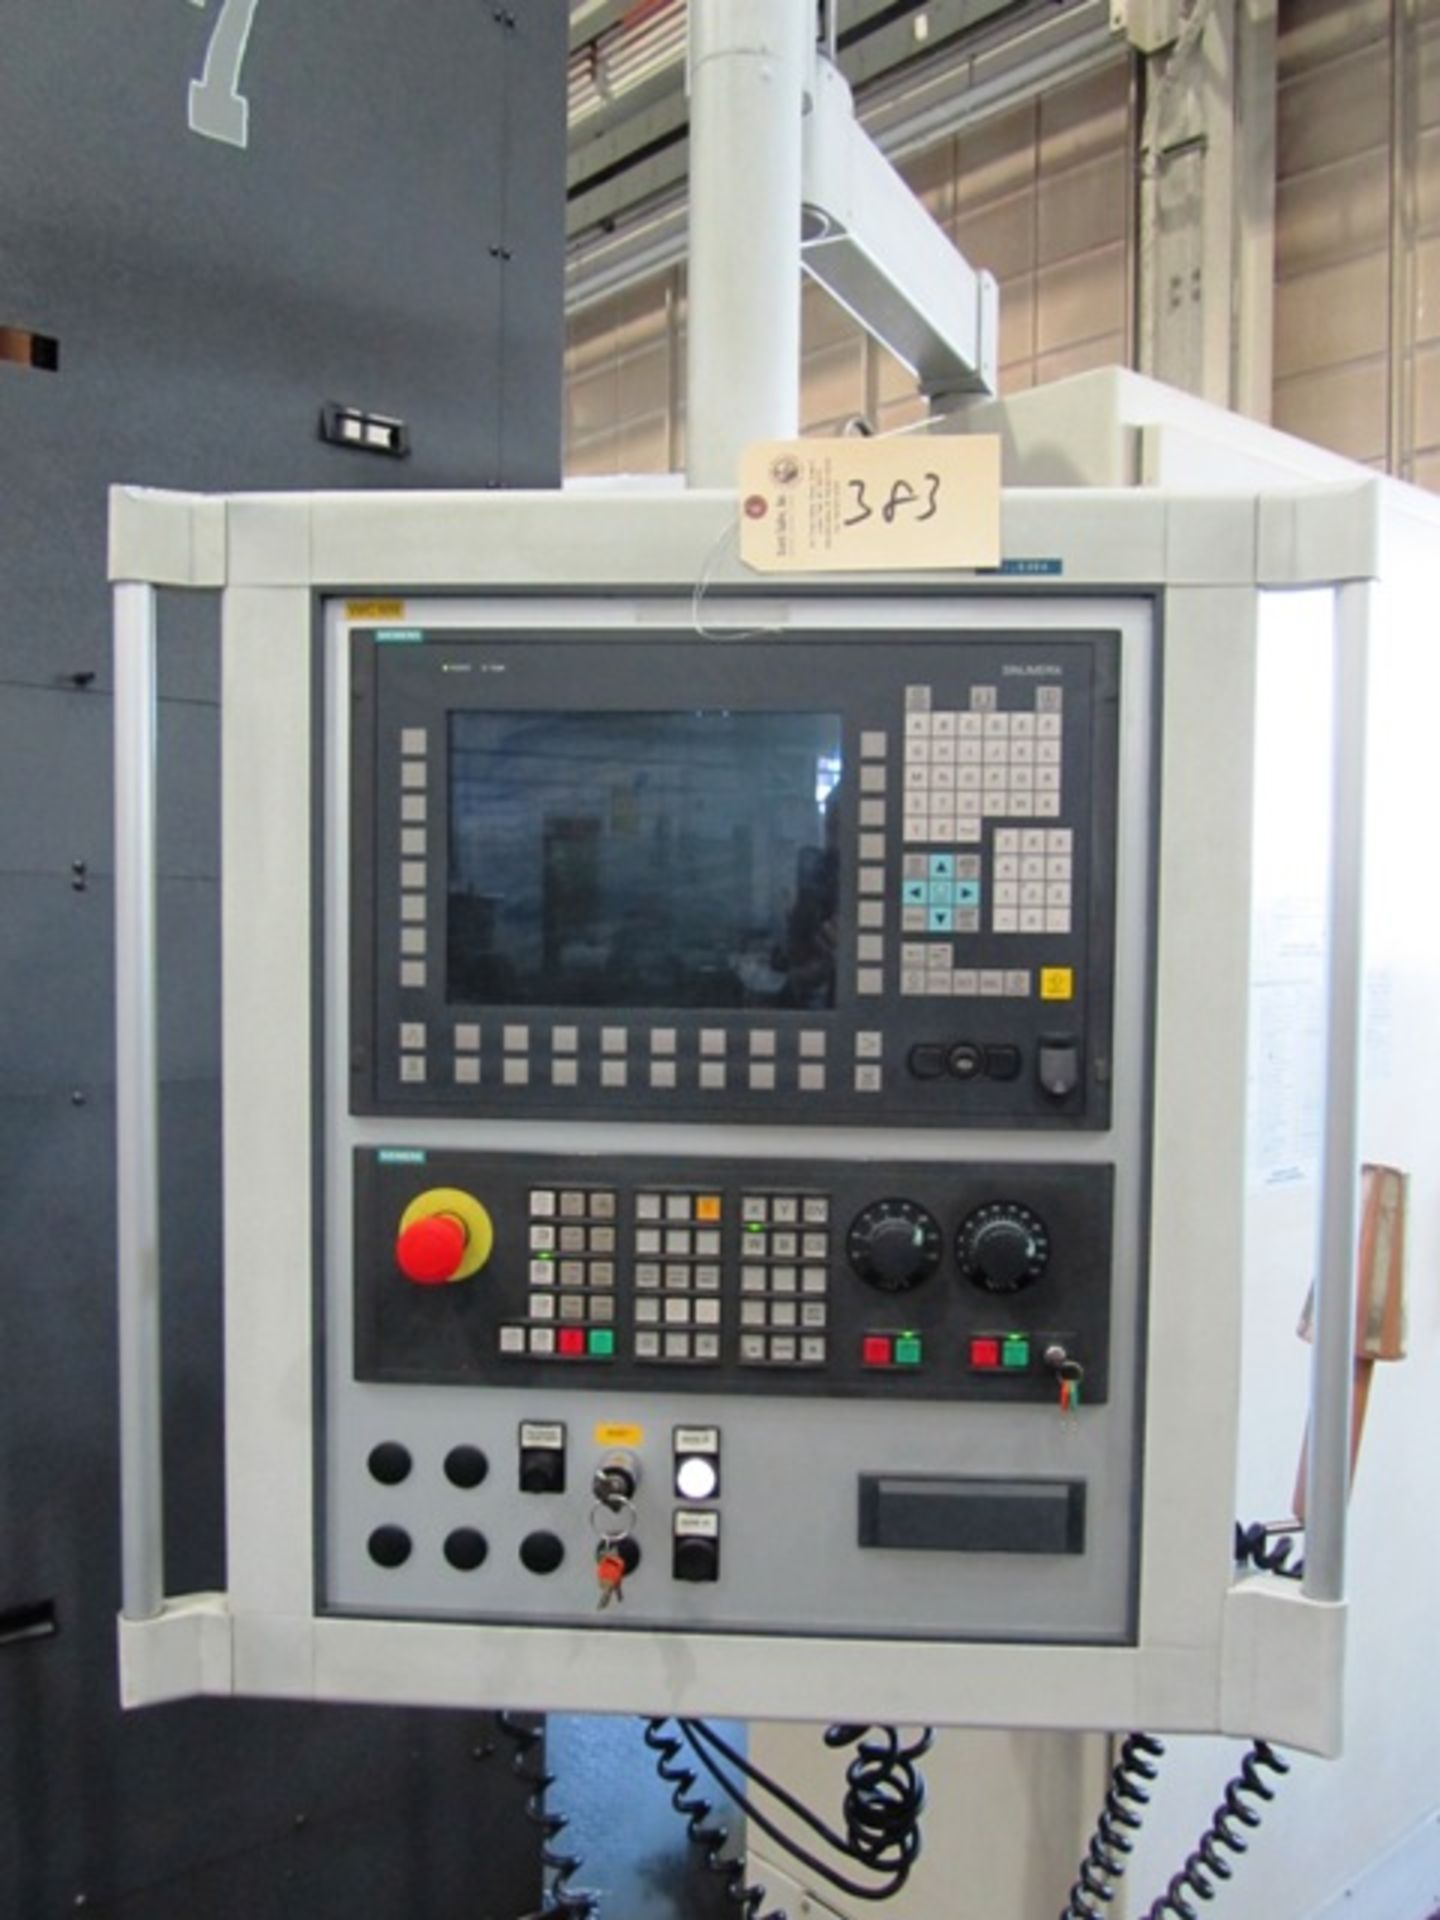 Giddings & Lewis Model RT 1600 6.1'' CNC Table Type Horizontal Boring Mill with 63'' x 98.4'' B-Axis - Image 2 of 4